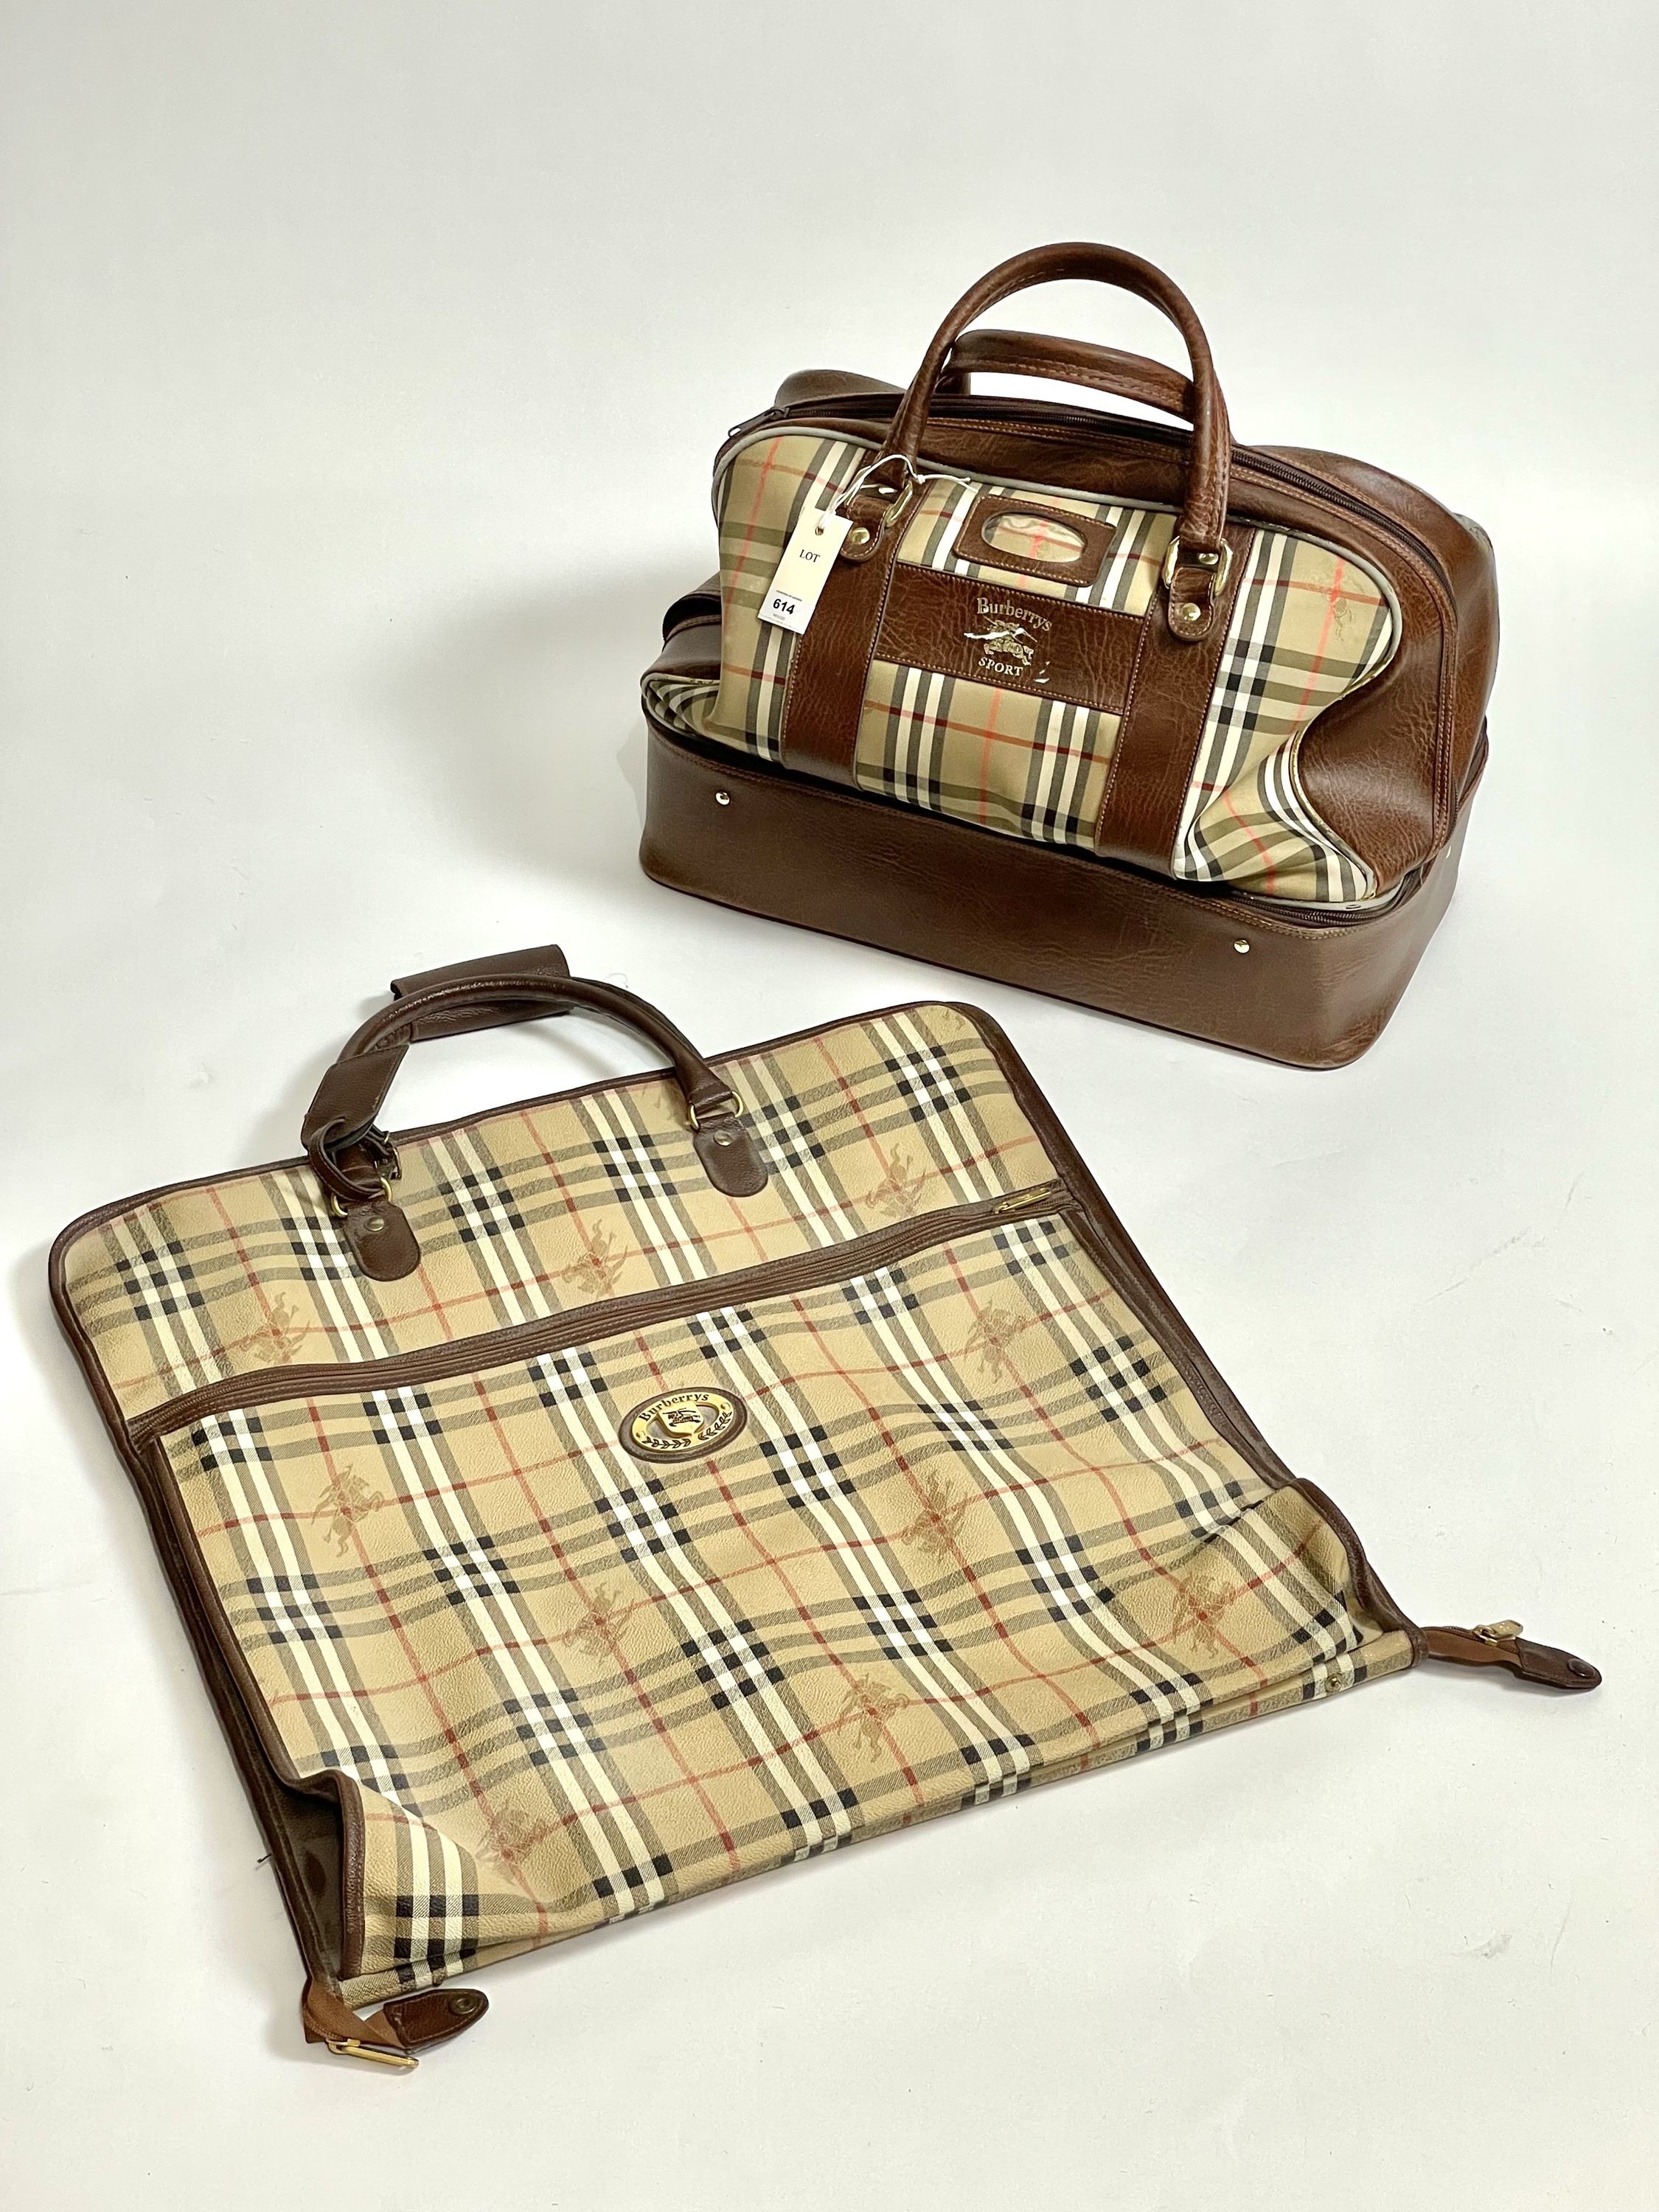 Burberry bags for sale in Newcastle, New South Wales